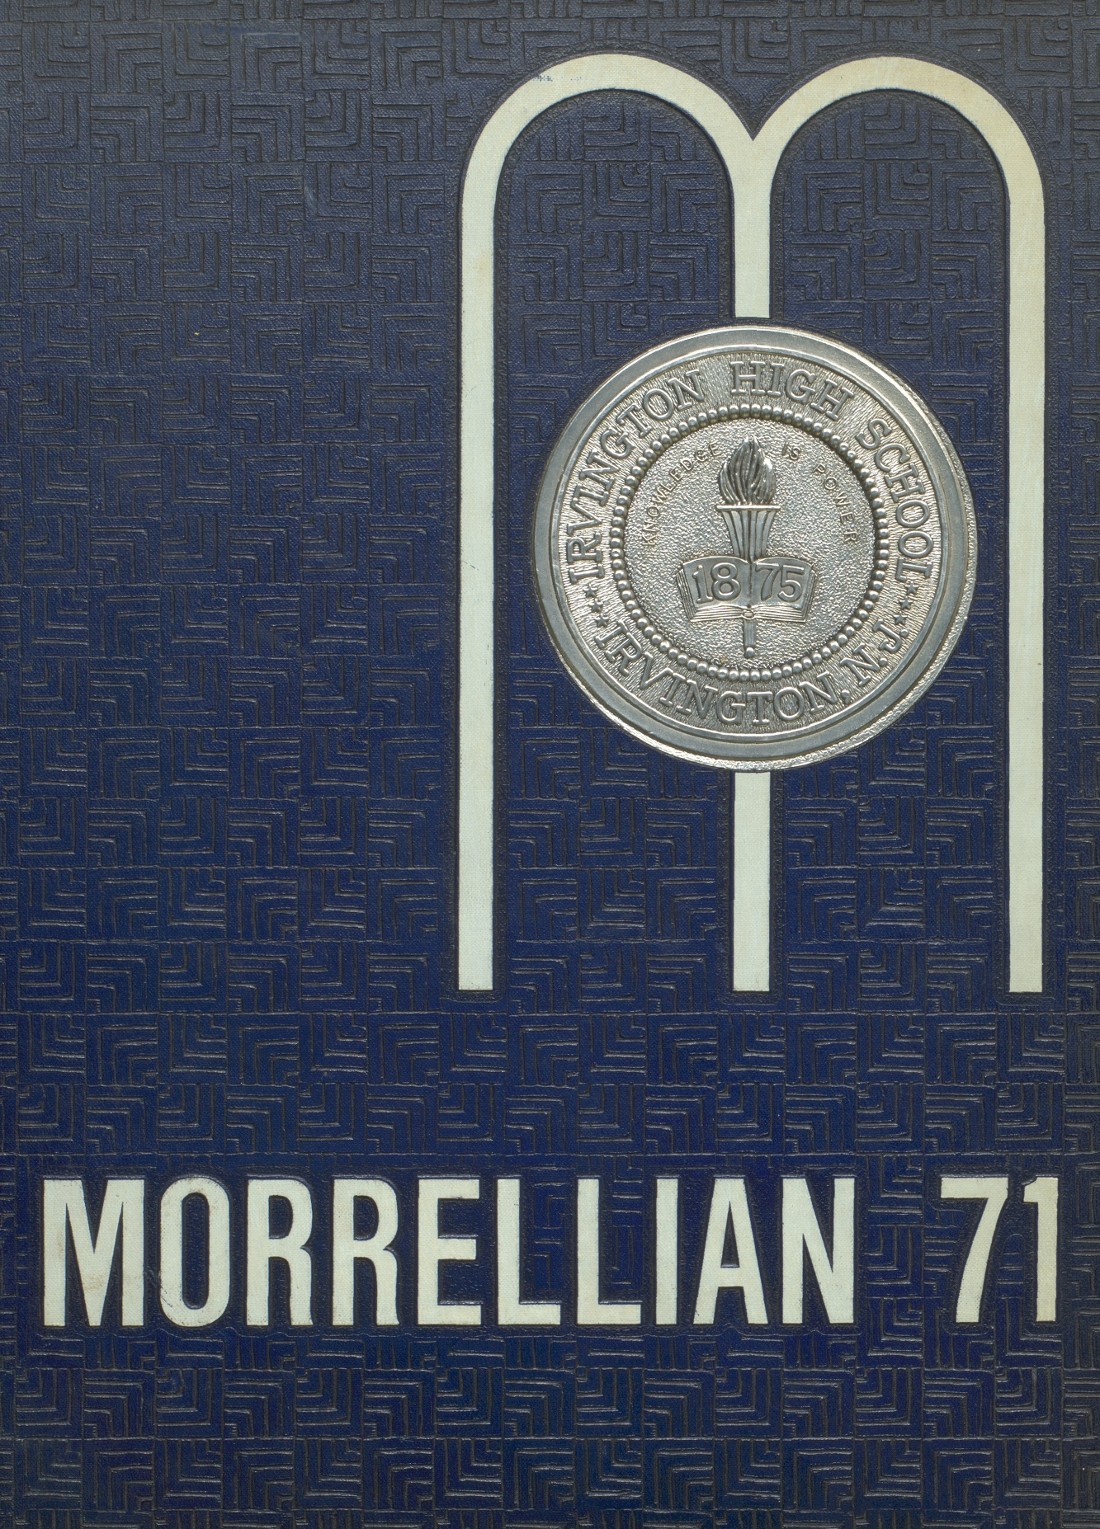 1971 yearbook from IrvingtonFrank H. Morrell High School from